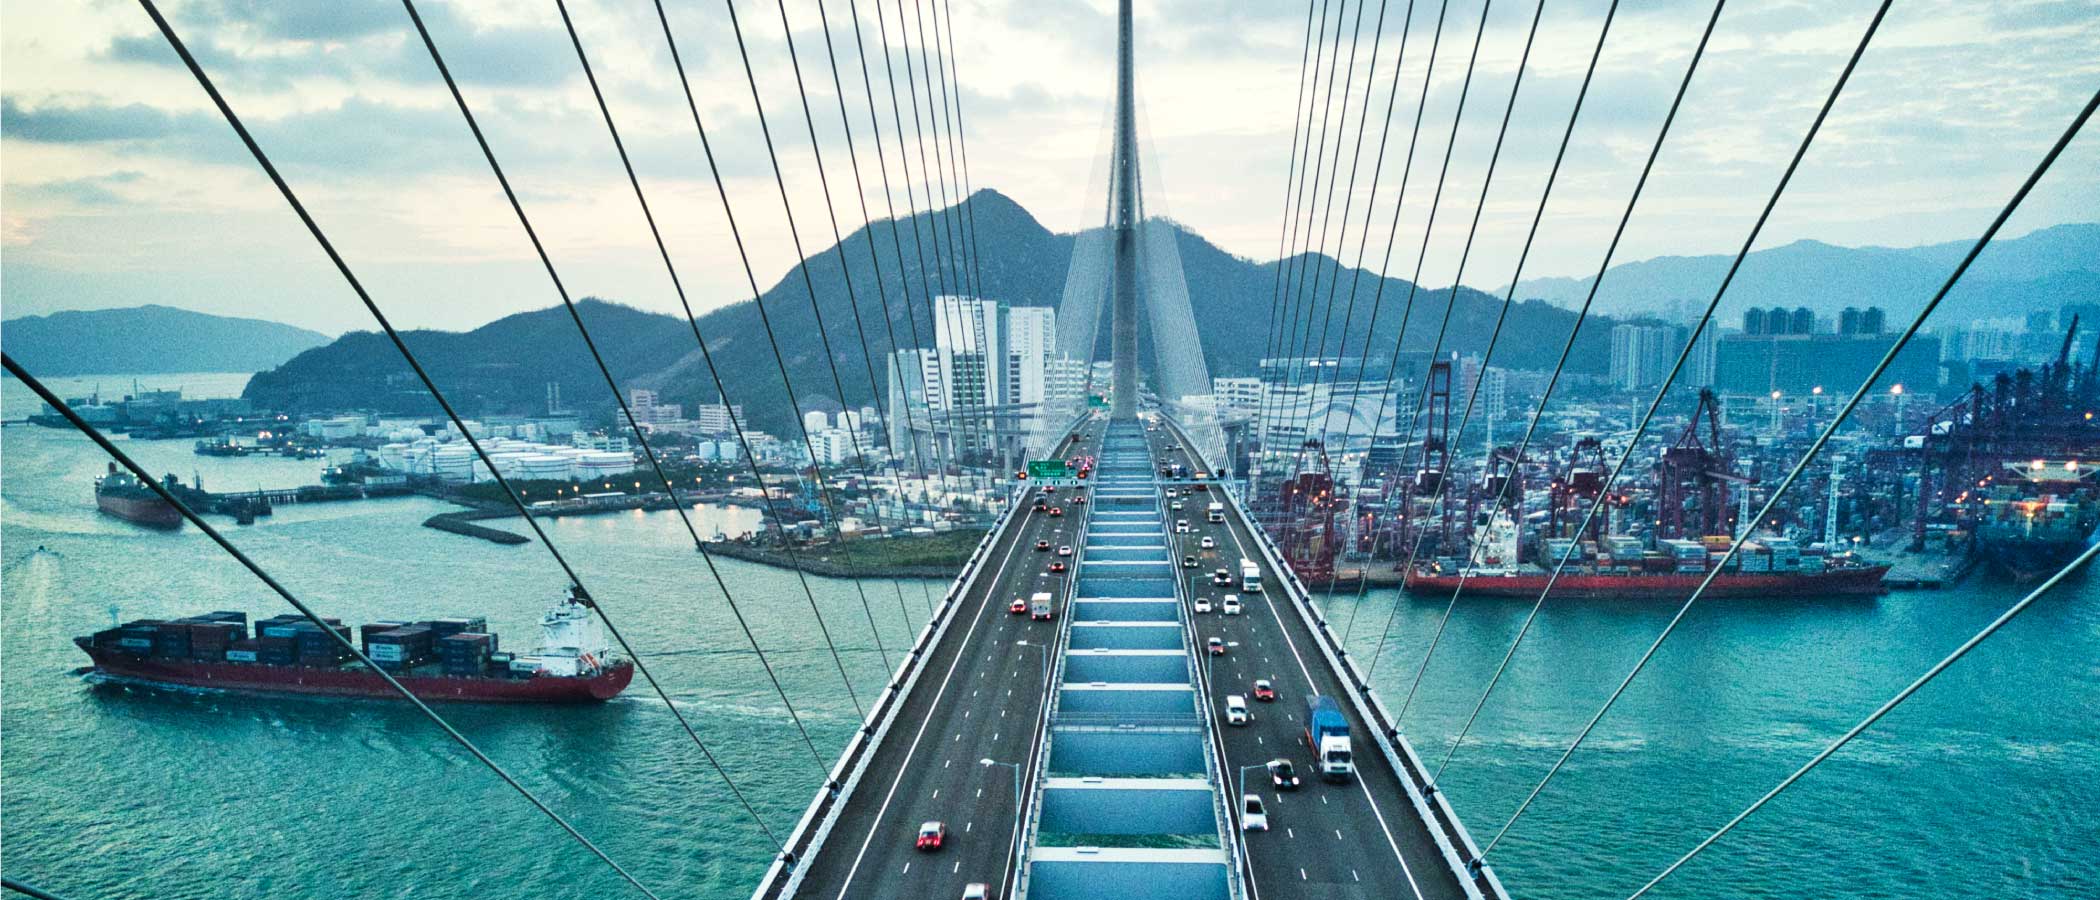 Large suspension bridge highway leading into a city, with a cargo ship passing below.